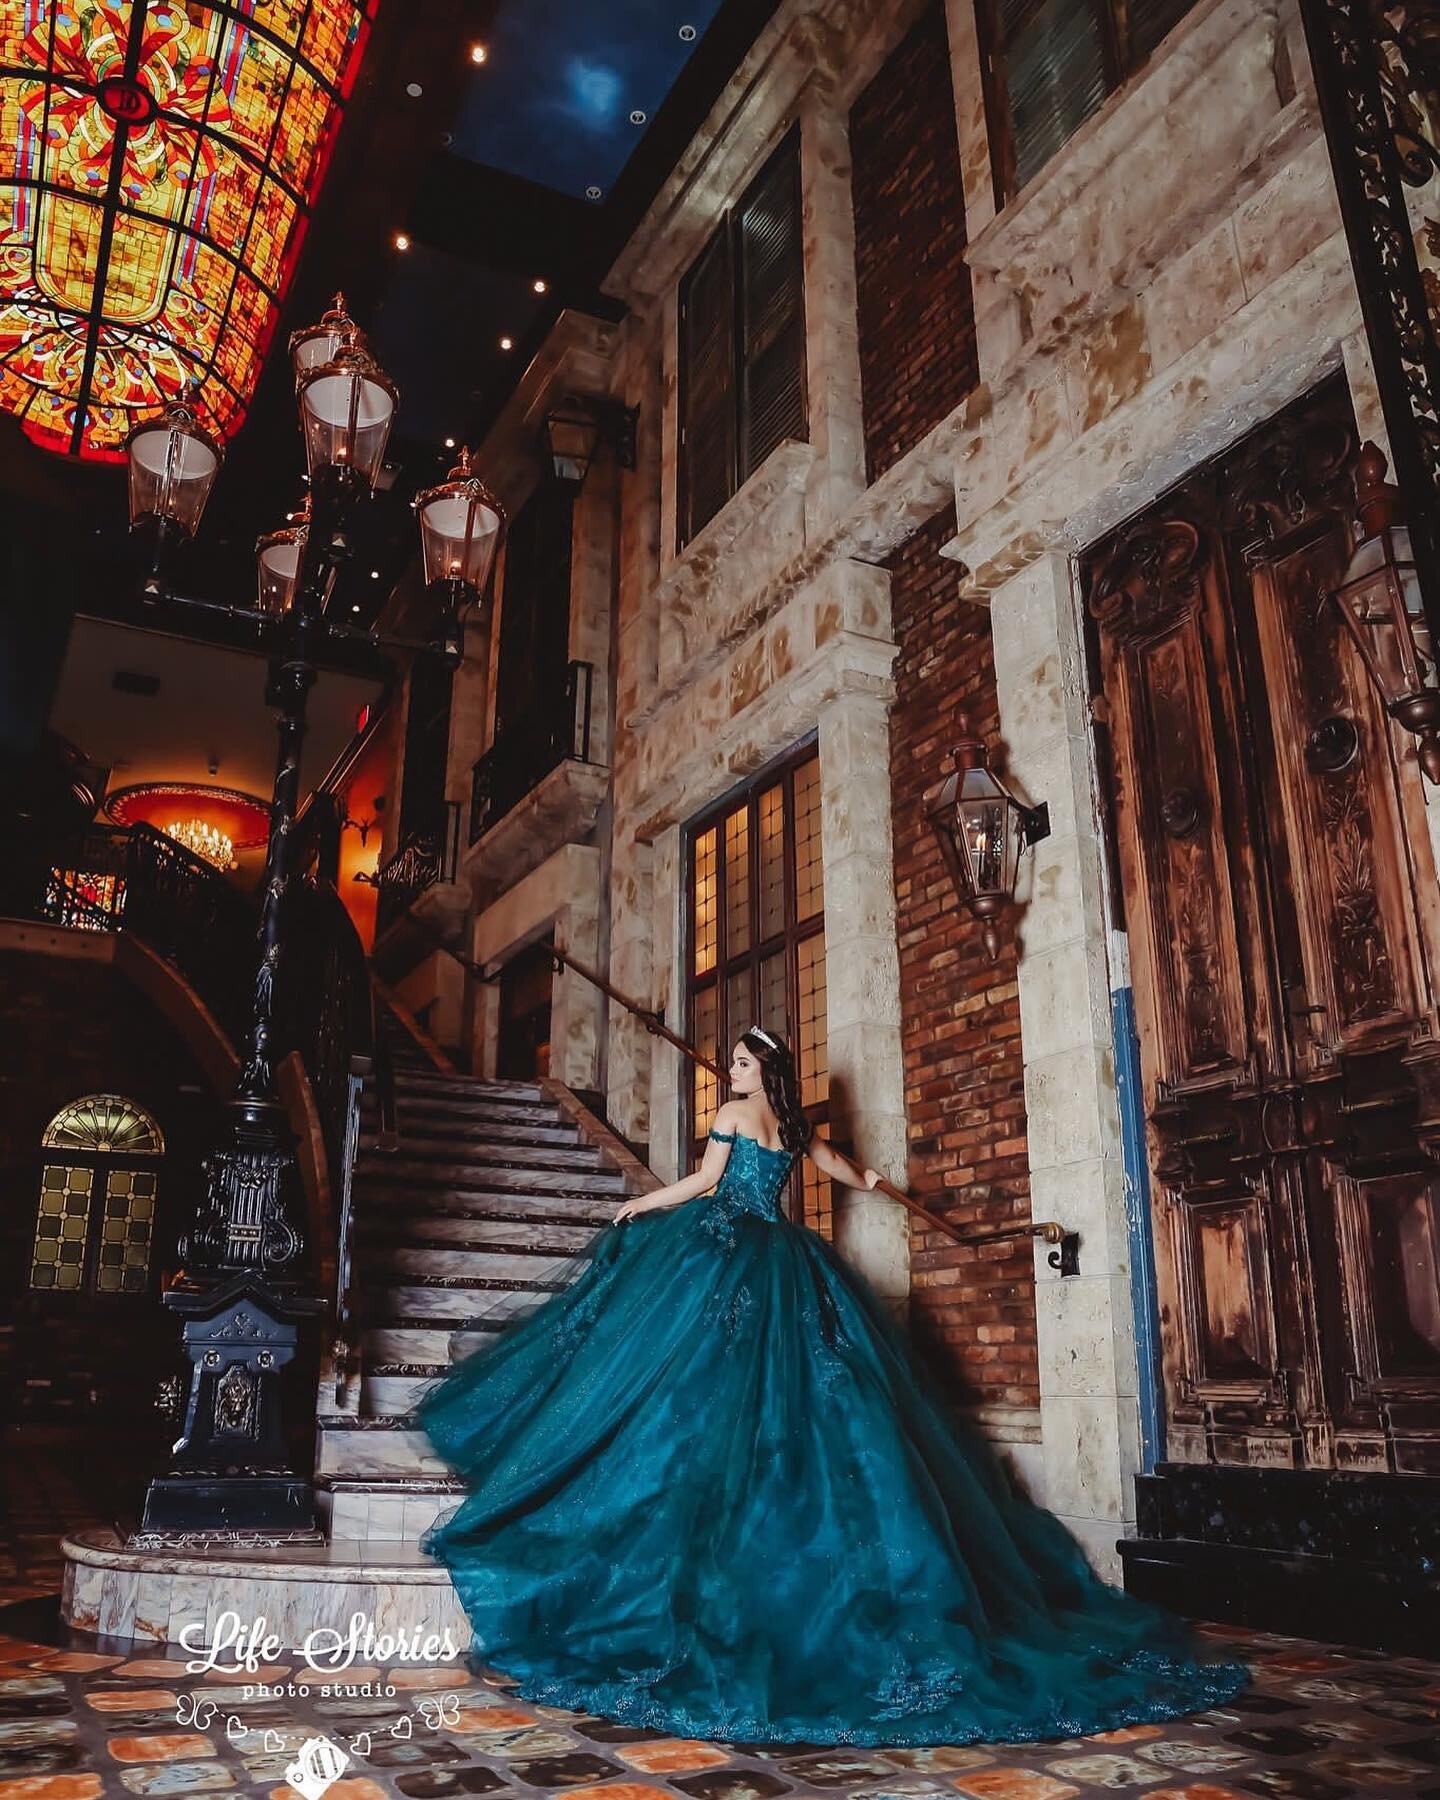 WOWWW... blown away by these photos💚💚
📸: @lifestoriesphotostudio 
&bull;
&bull;
&bull;
&bull;

#quince#quinceañeramiami #quinceañera #quincedress #miami#miamidresses #miamidressrental#southflorida #dresses #gowns #dressrental #quinceañeras #qui